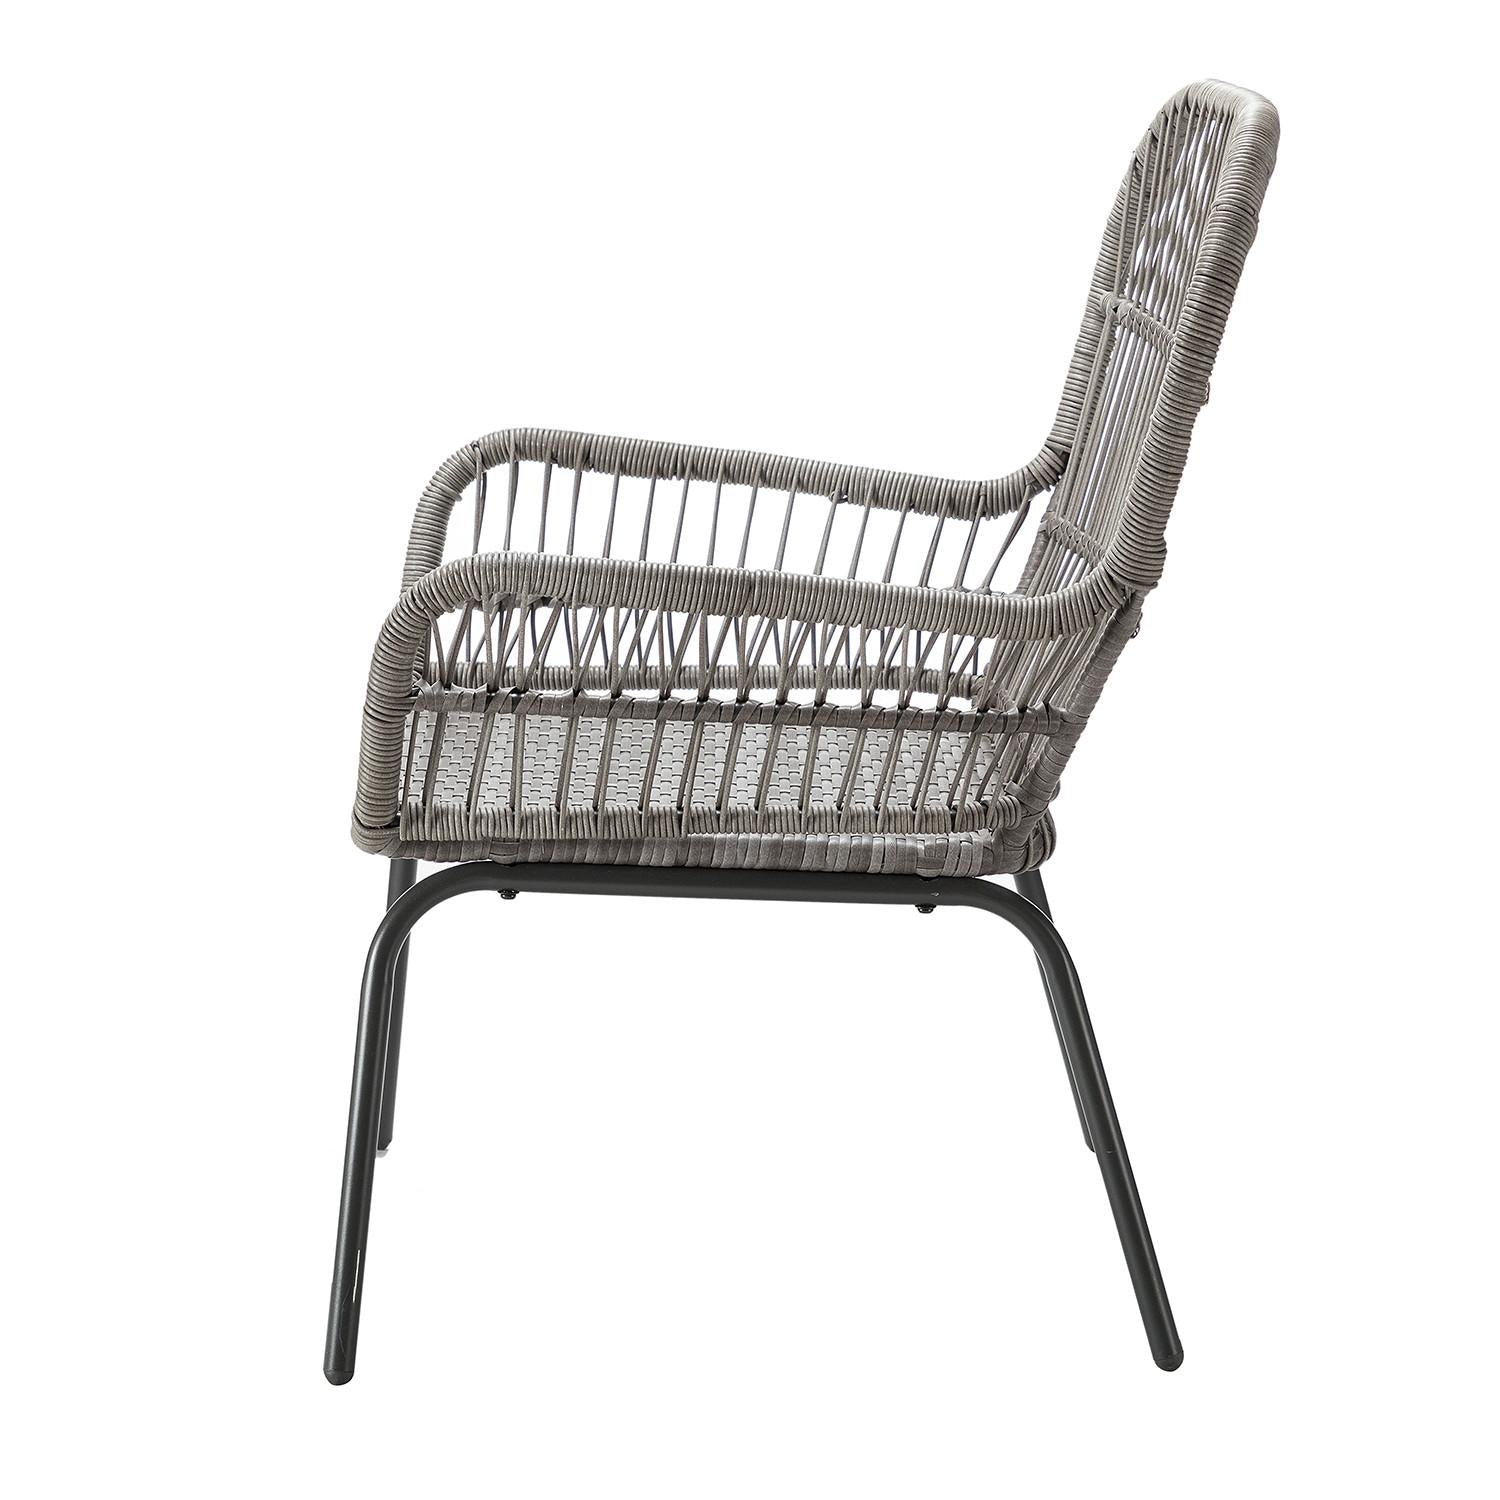 Gray Faux Rattan and Creamsicle Stripe Outdoor Chair and Table Set